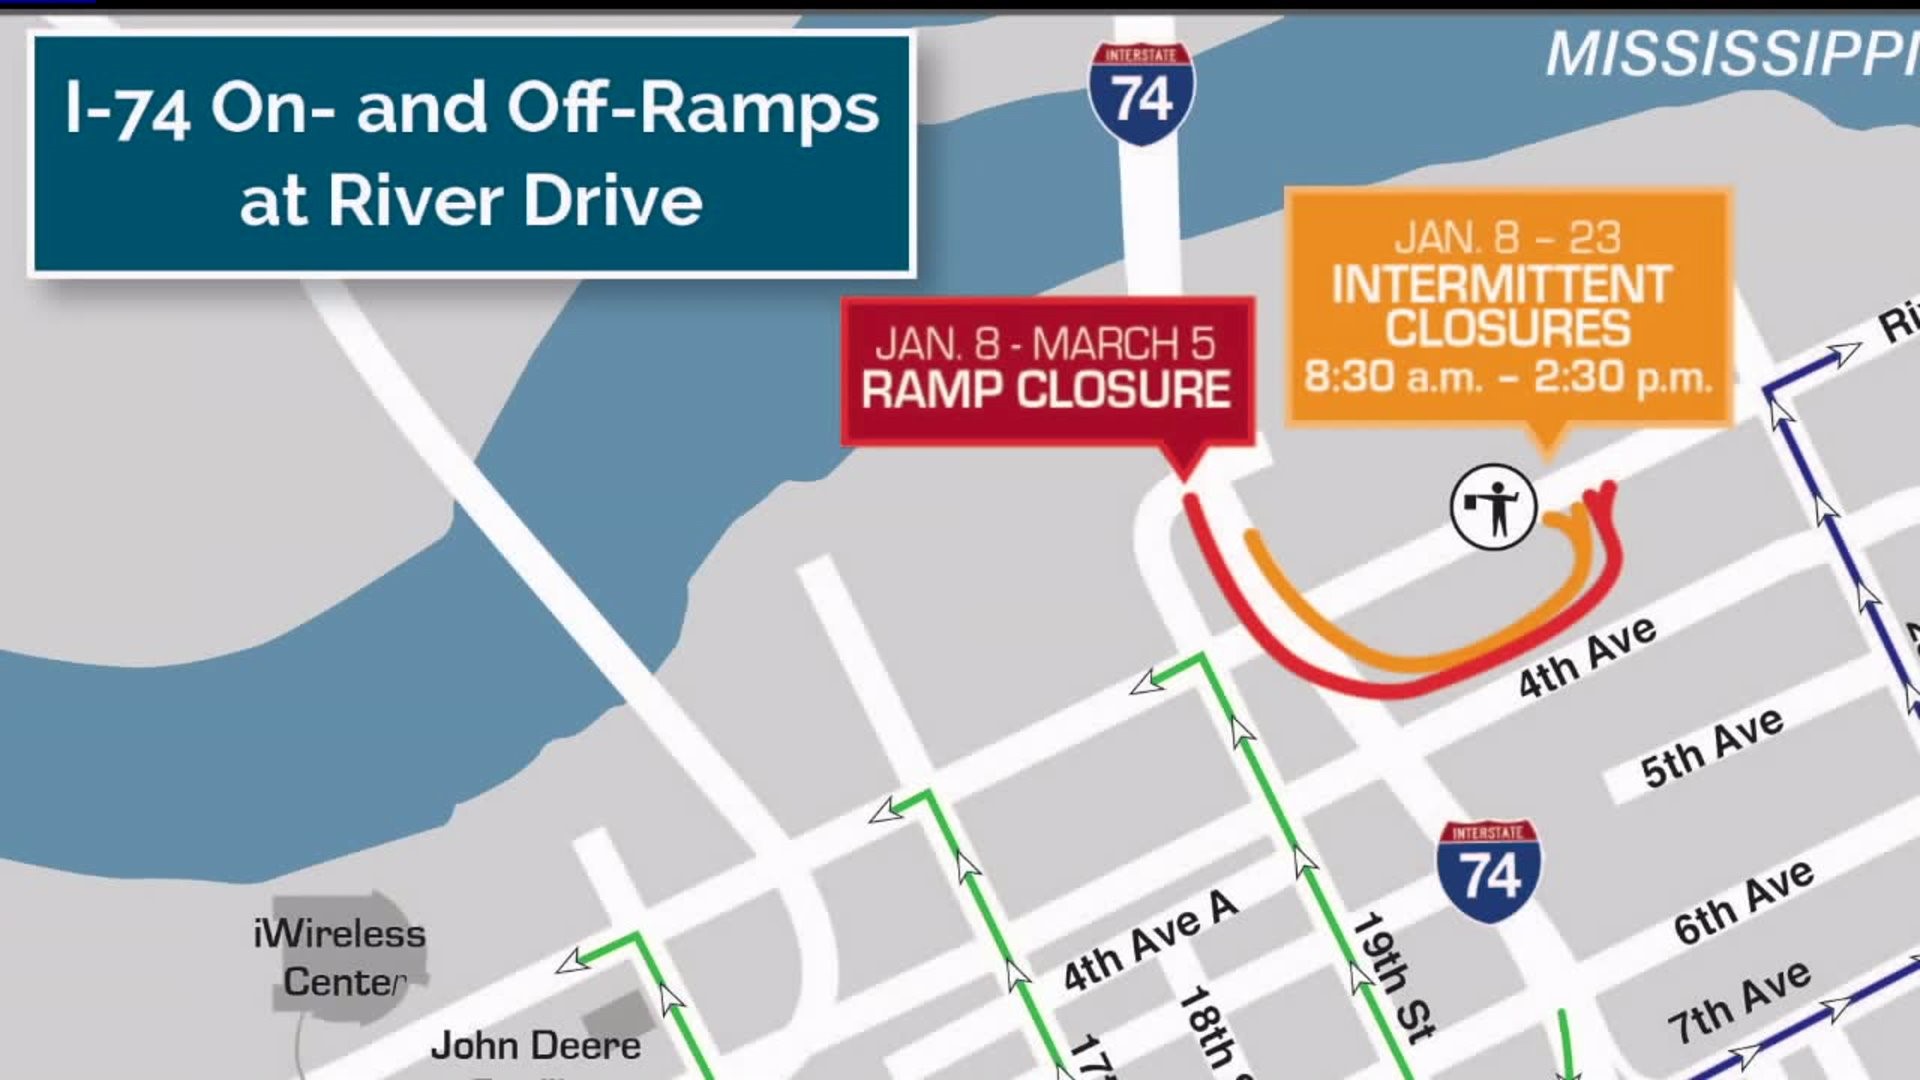 I-74 ramp closures will affect River Drive traffic in Moline